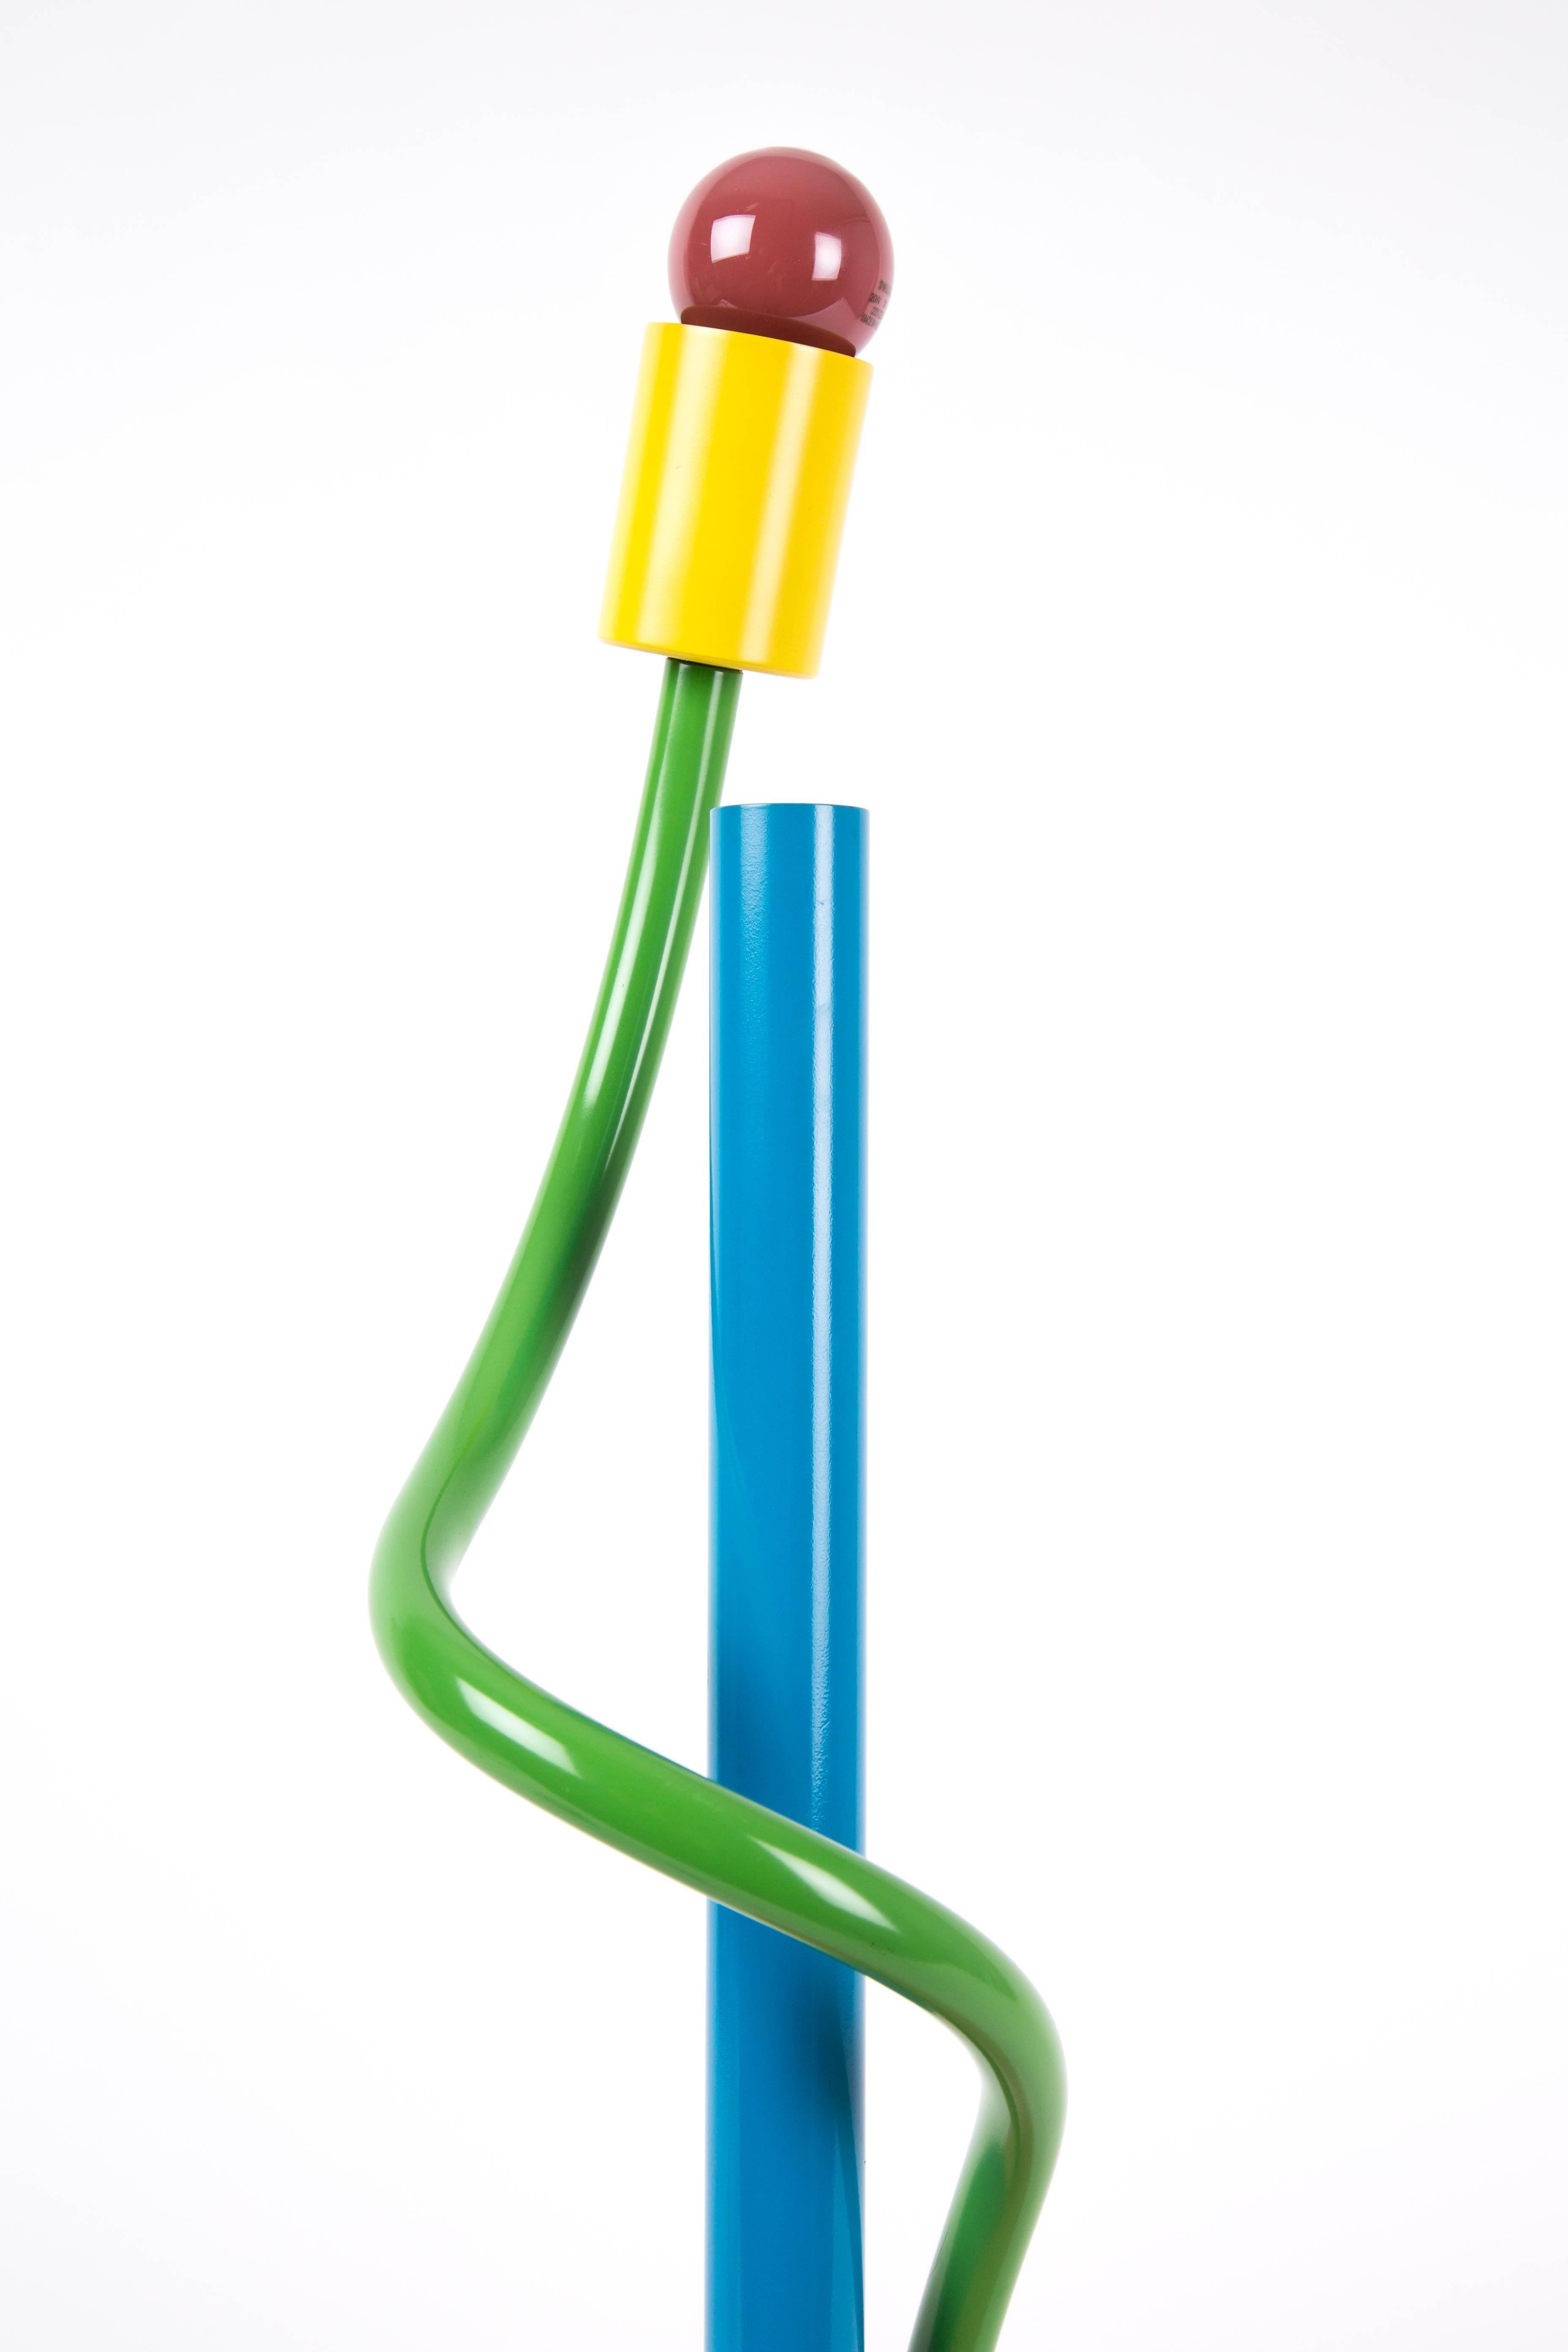 Sinerpica lamp by Michelle de Lucchi for Alchimia. De Lucchi is a member of the Memphis movement. This lamp has happy colors, blue, yellow, green and pink. Not in production yet. There are no re-editions of this lamp, thus very exclusive. Good to